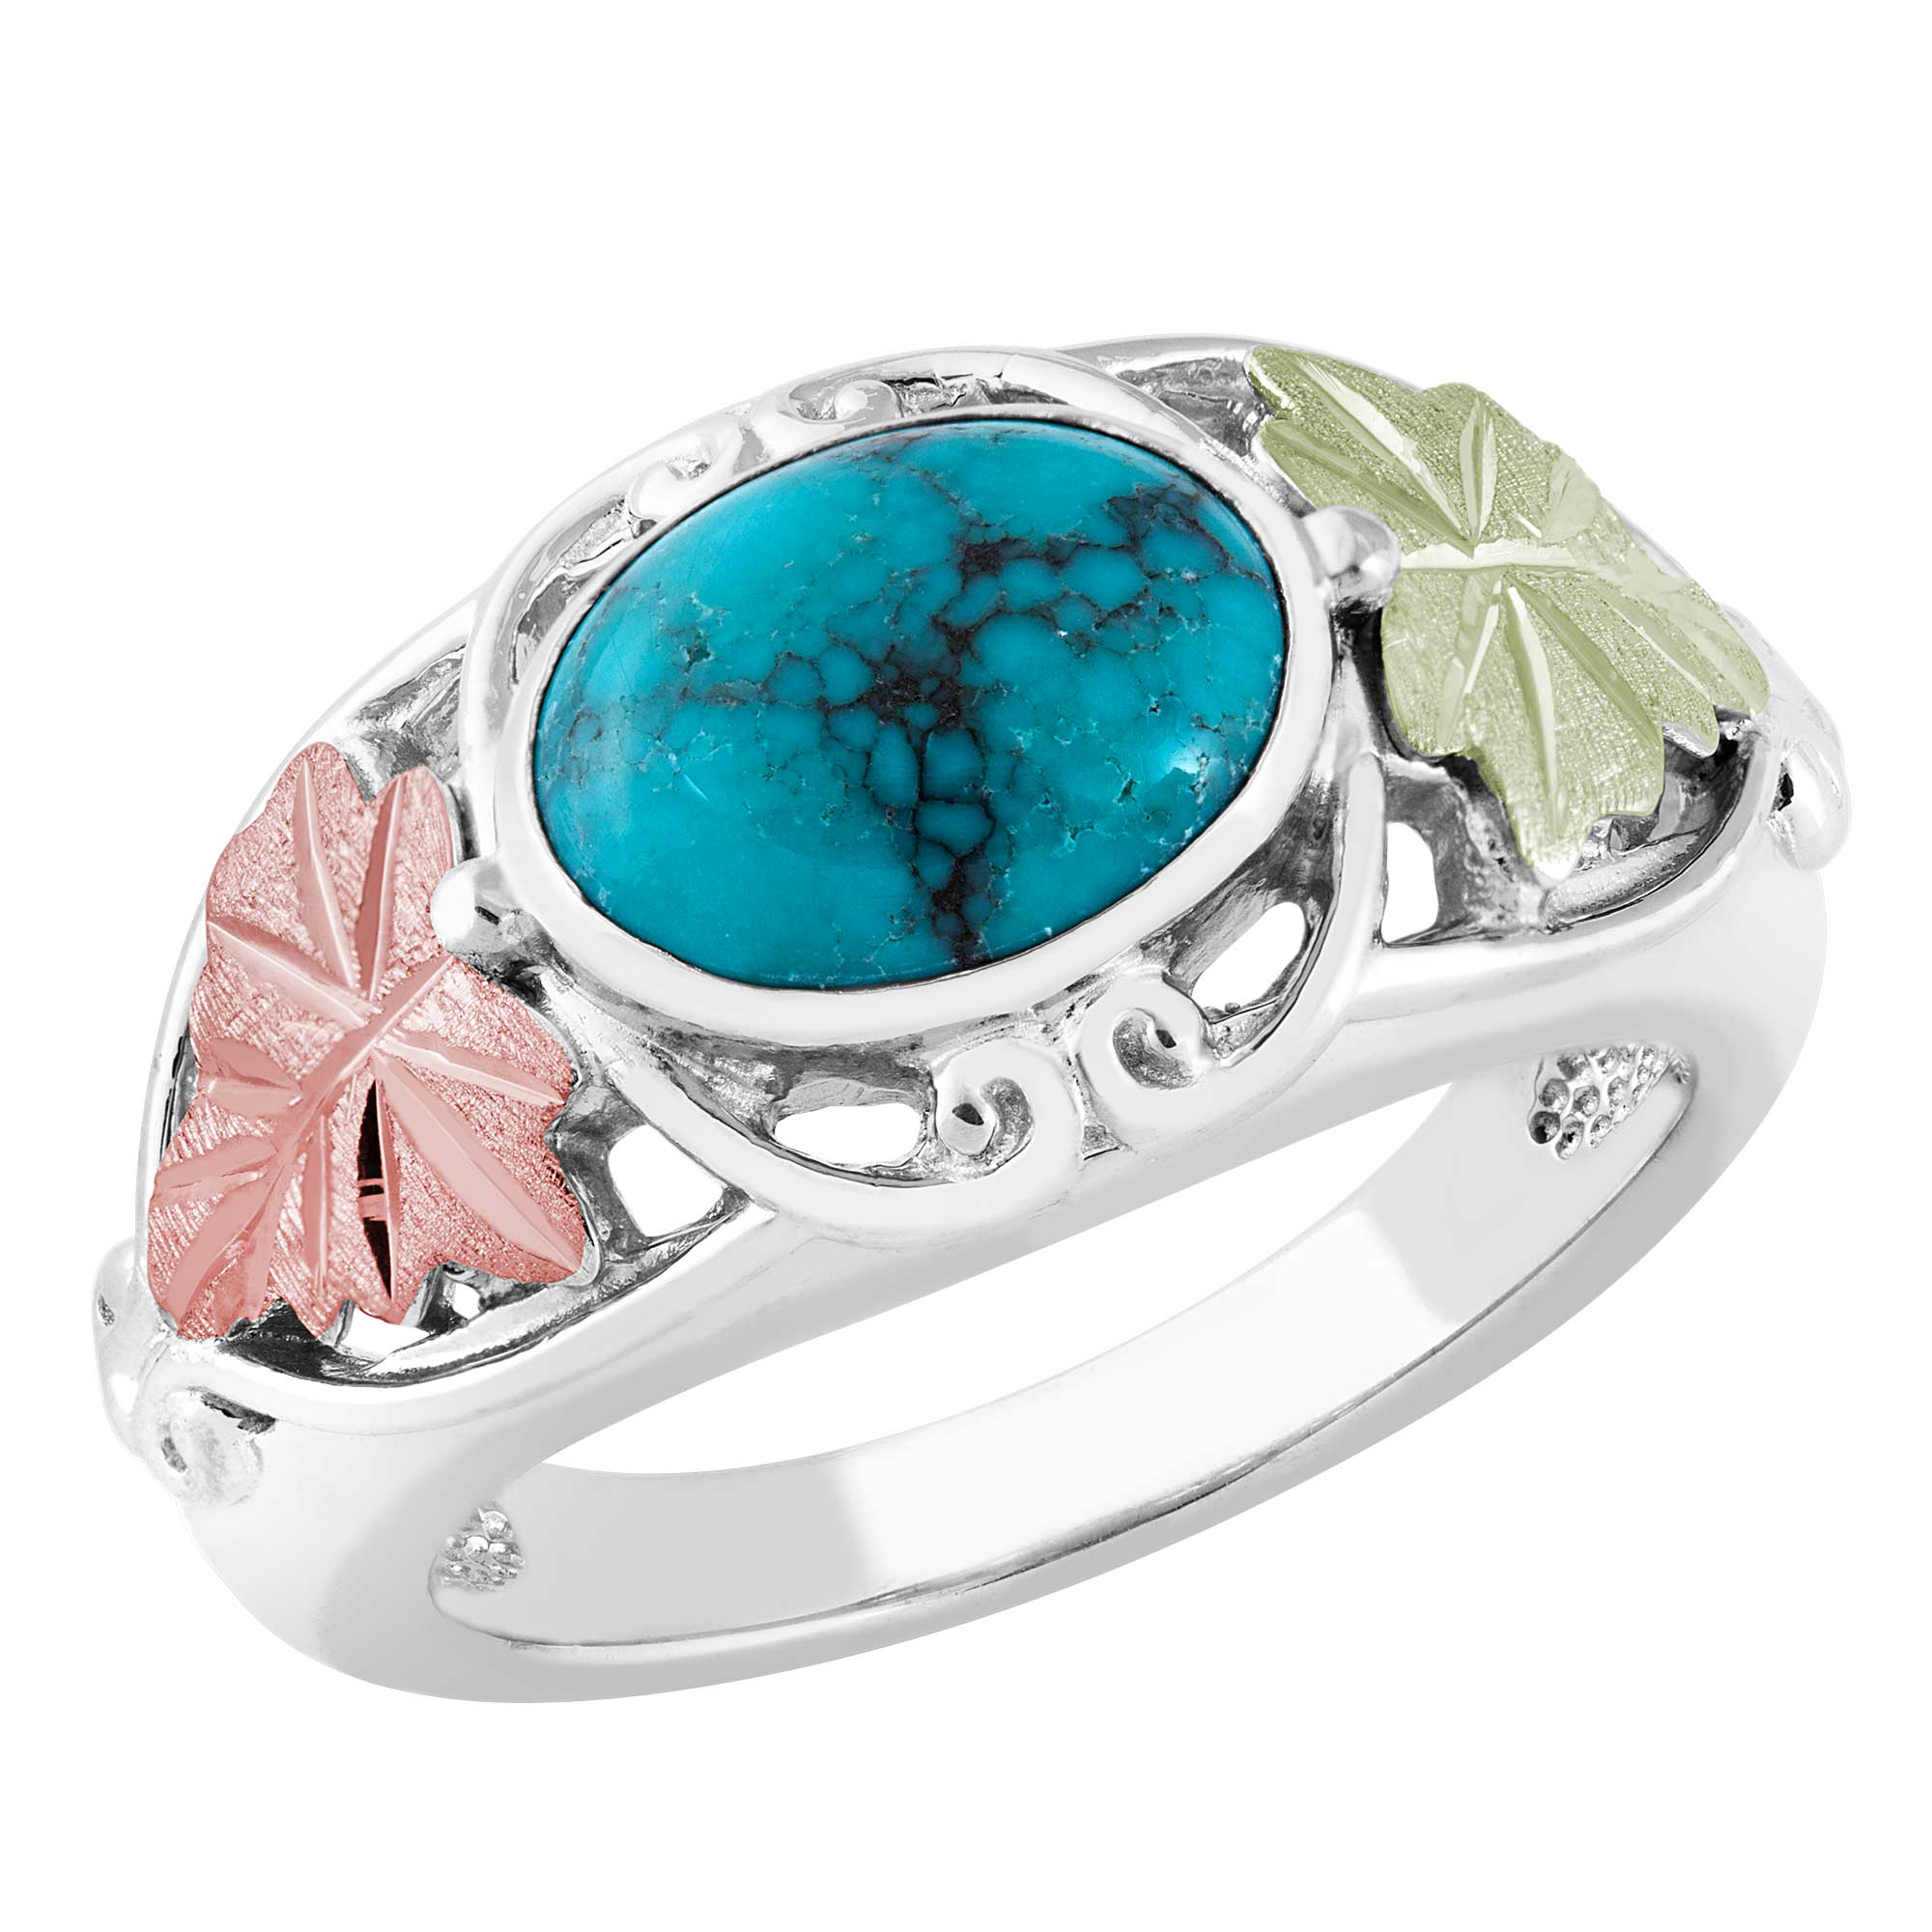 Turquoise ring black hills gold on sterling silver. 